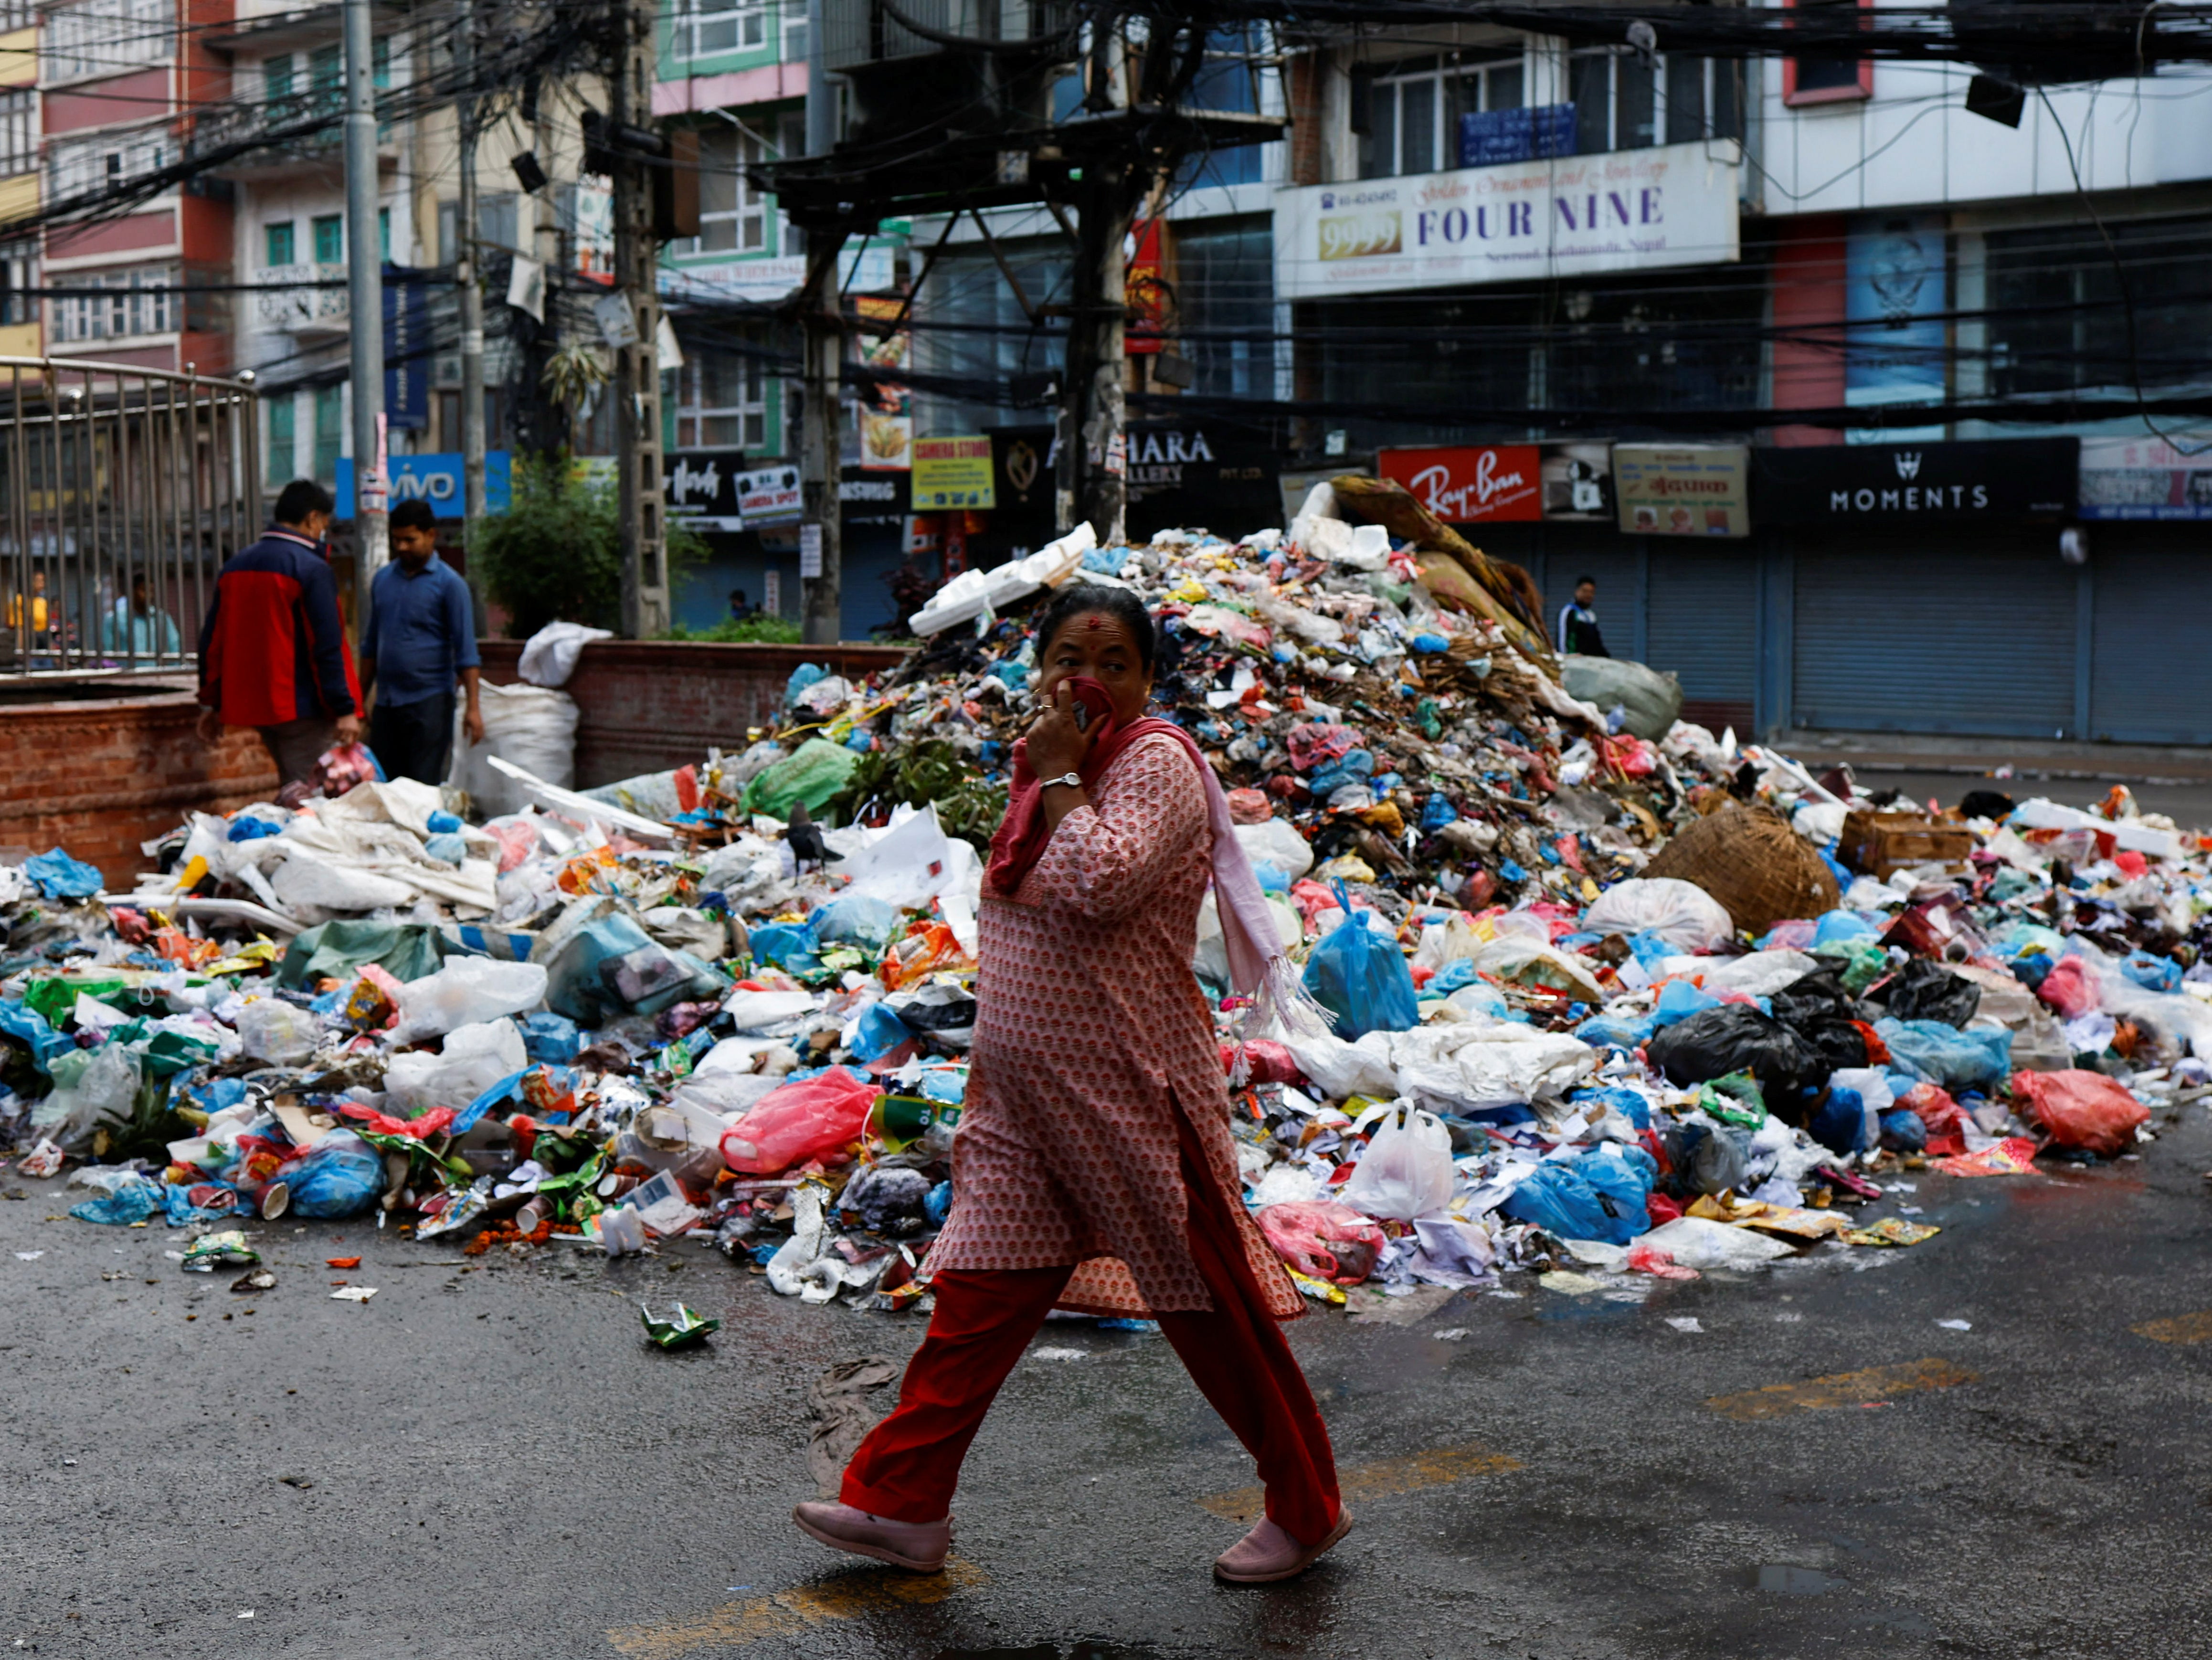 A woman covers her face as she walks past a pile of garbage dumped along the street in New Road in Kathmandu on 8 June